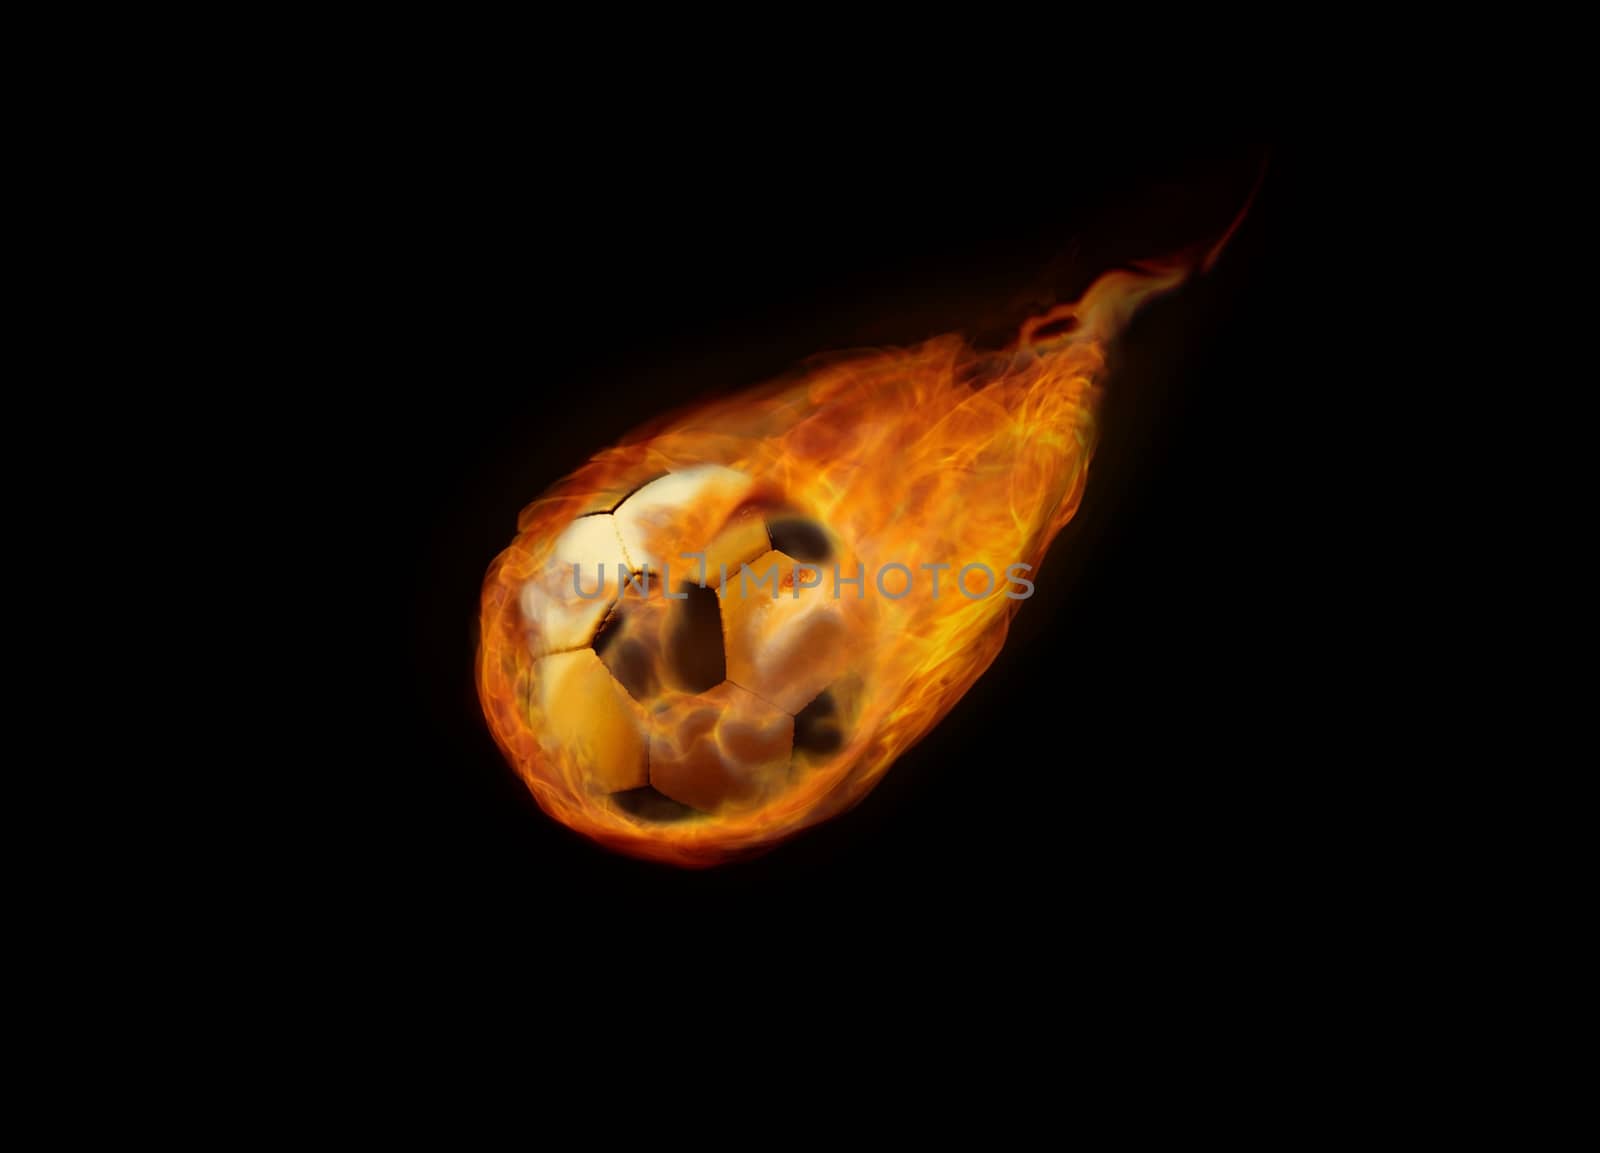 Soccer Ball Flying in Flame by razihusin